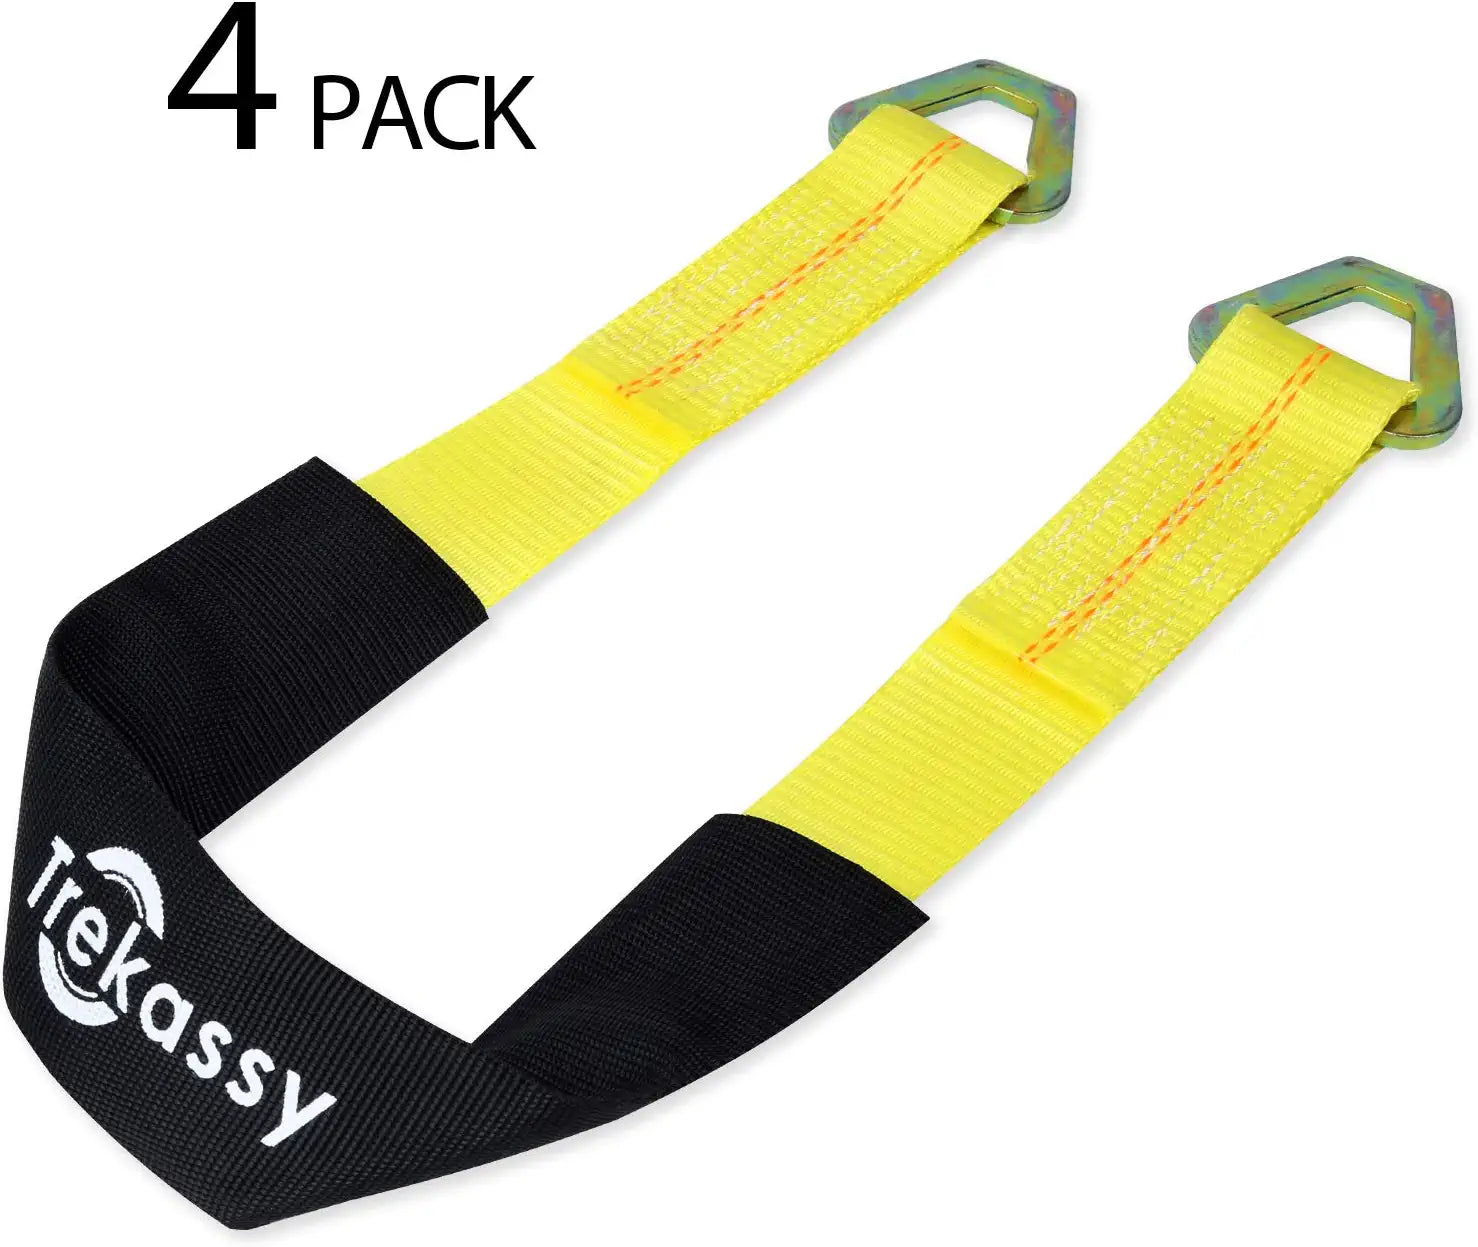 4 Pack 36"x 2"Axle Tie Down Straps with D-Ring and Protective Sleeve 10,000 Pound Capacity